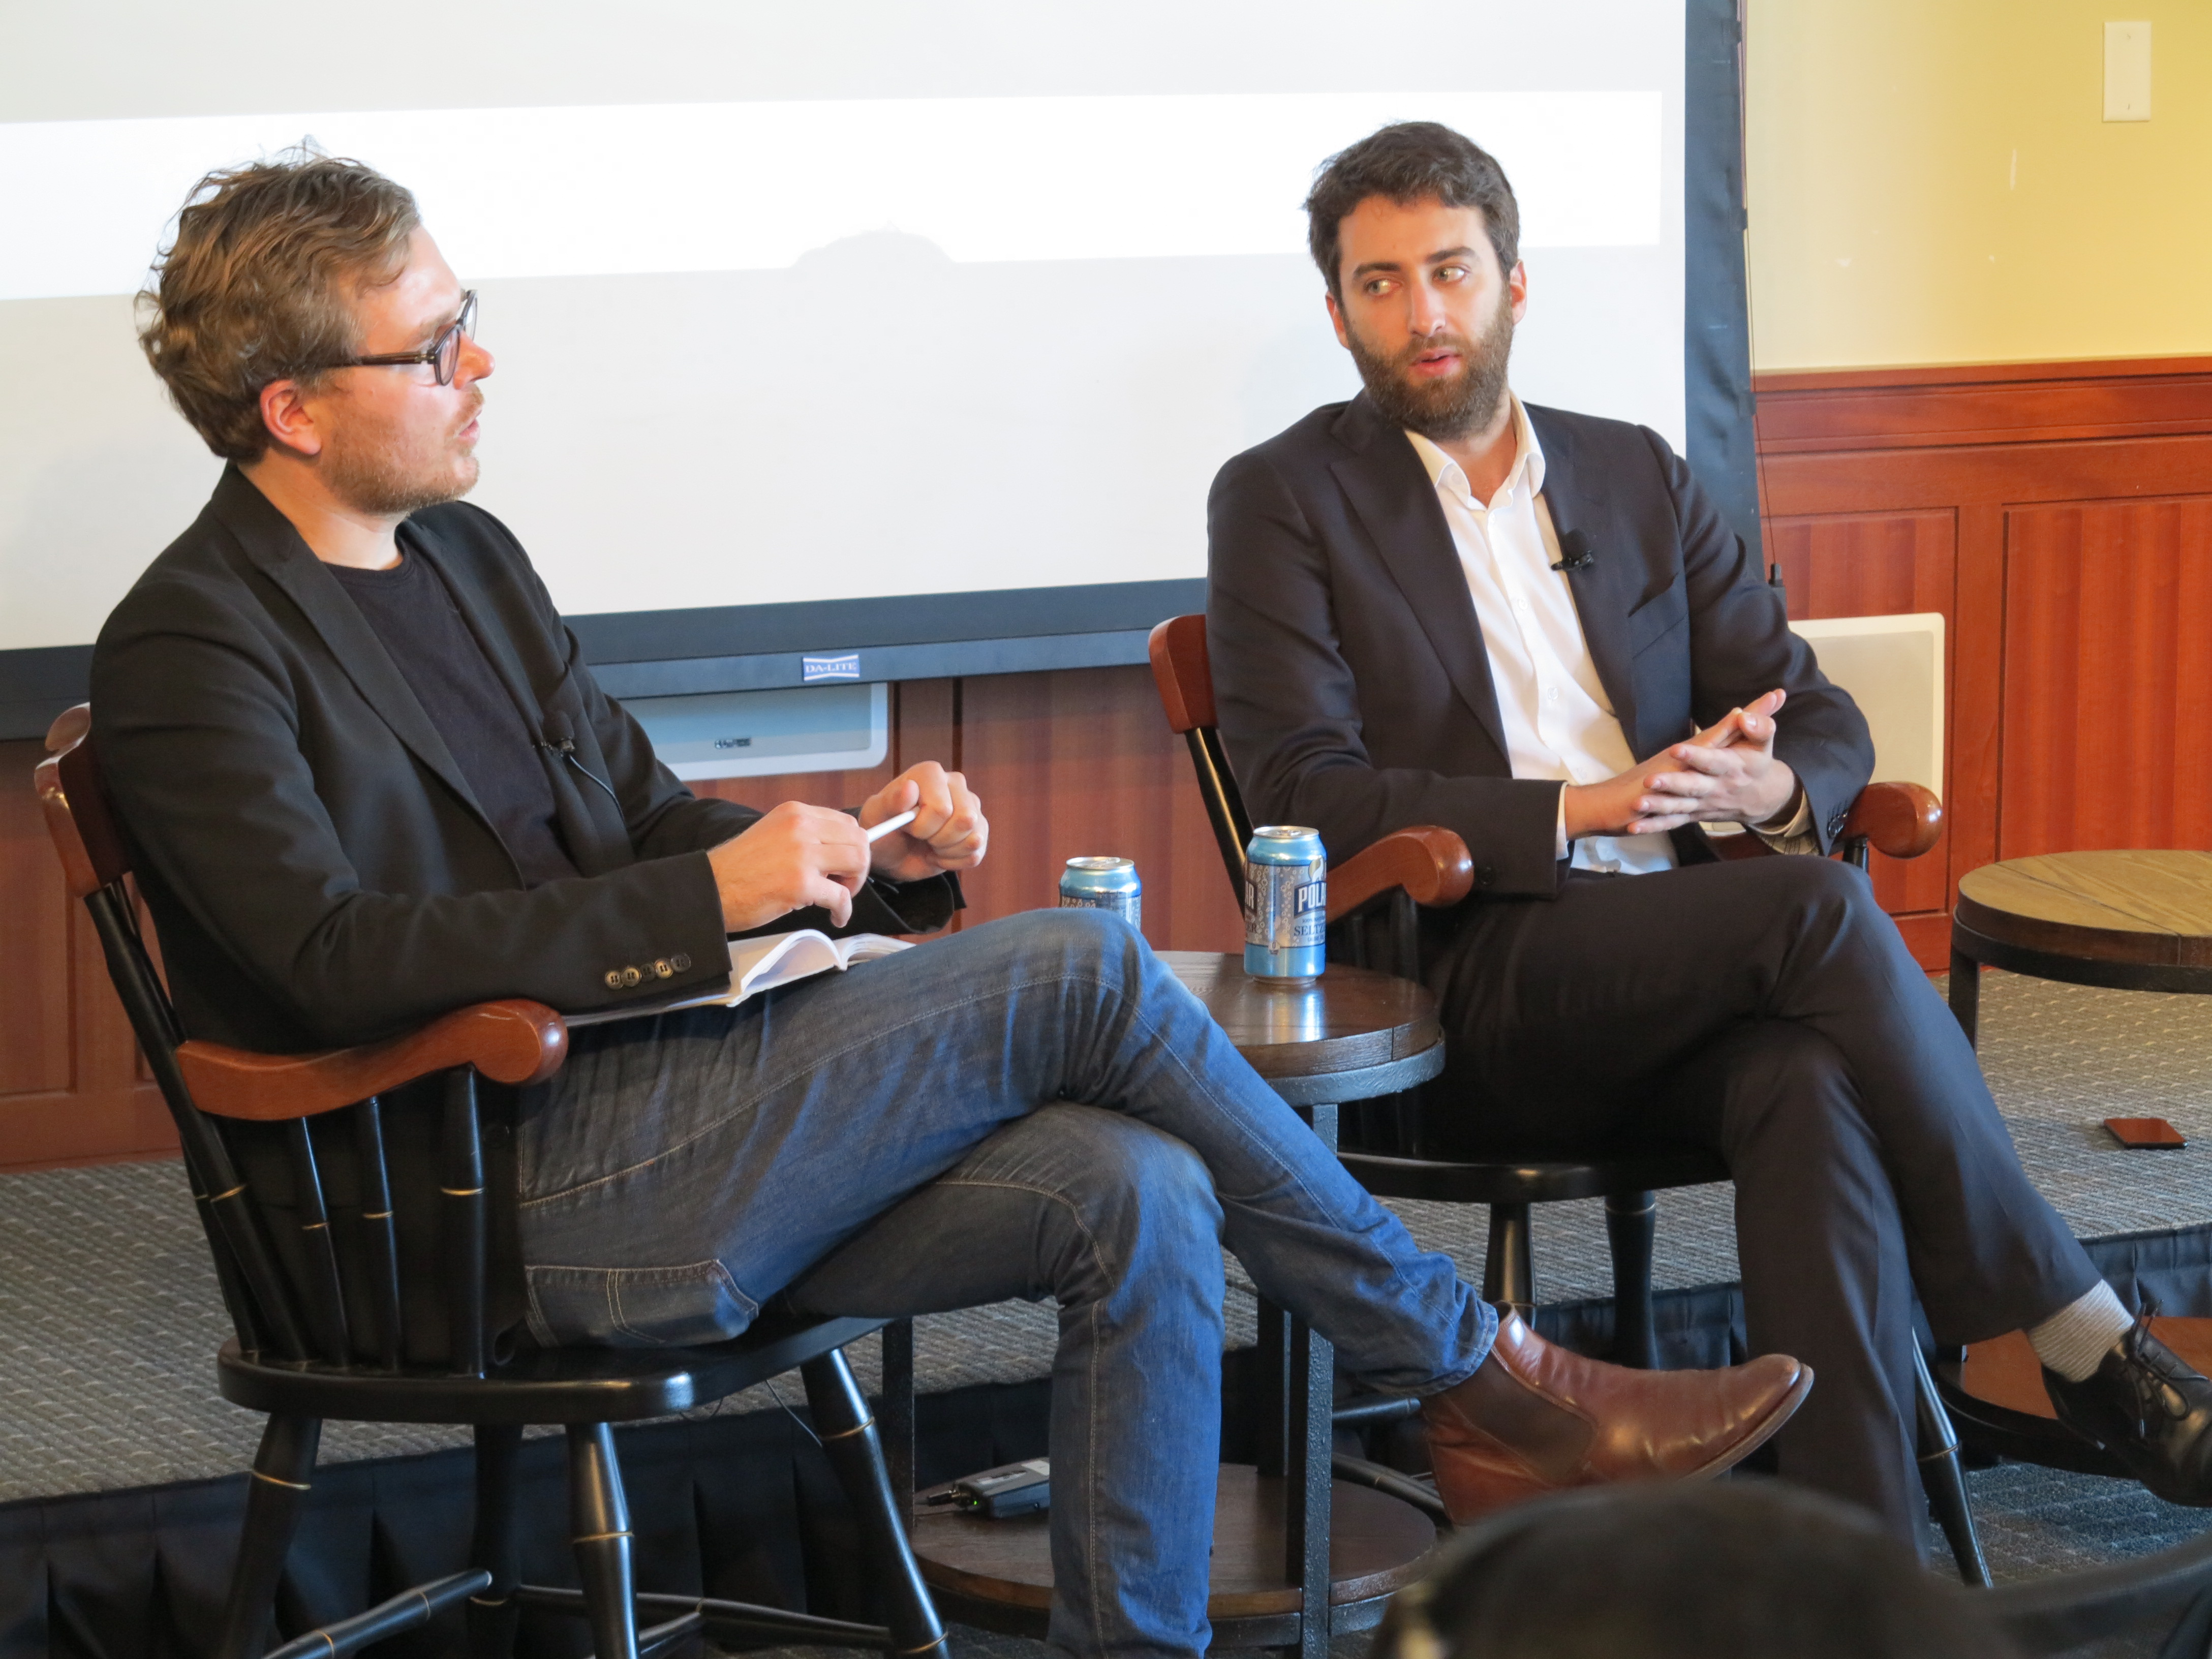 Matthew Caruana Galizia, right, speaks with Frederik Obermaier during a visit to the Nieman Foundation in February 